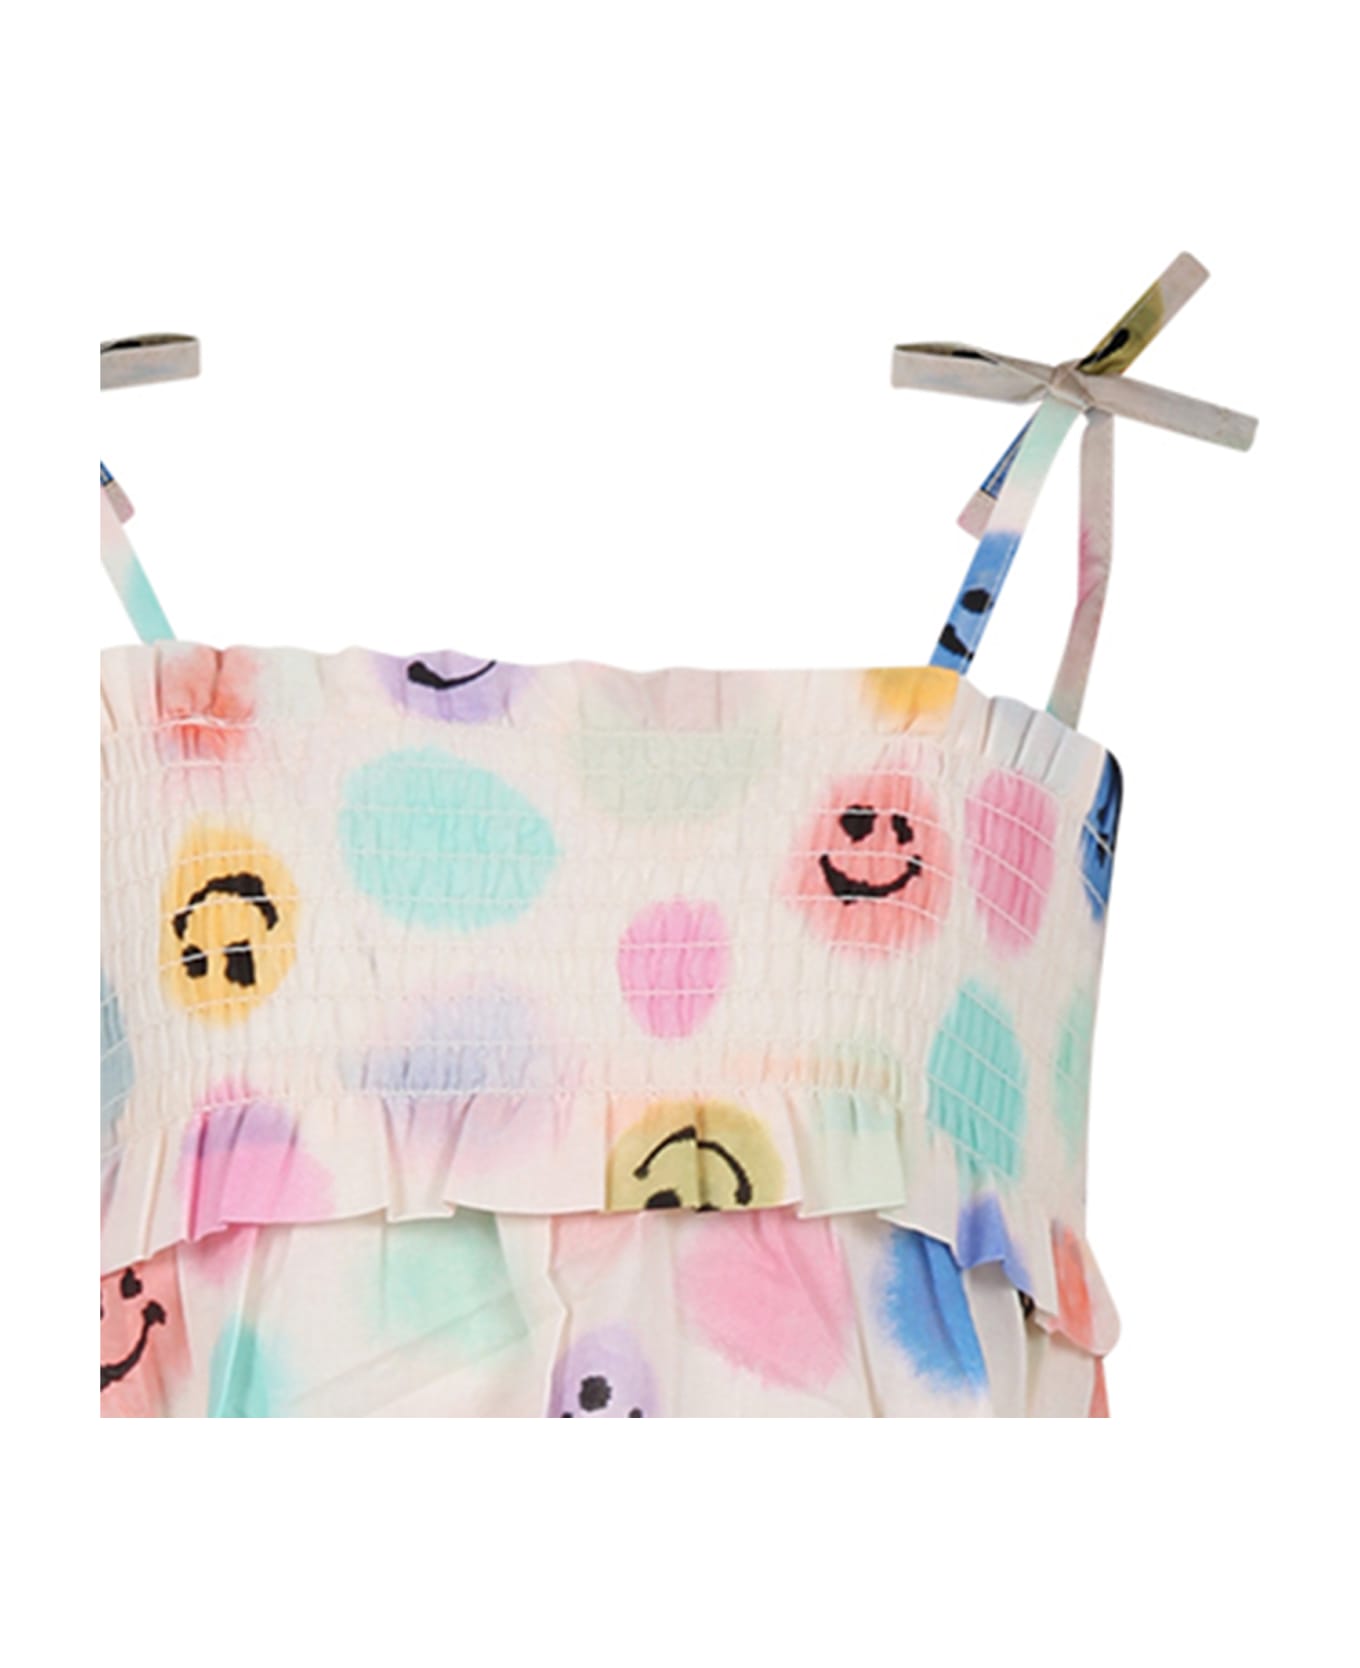 Molo Ivory Beach Cover-up For Girl With Smiley And Polka Dots - Multicolor